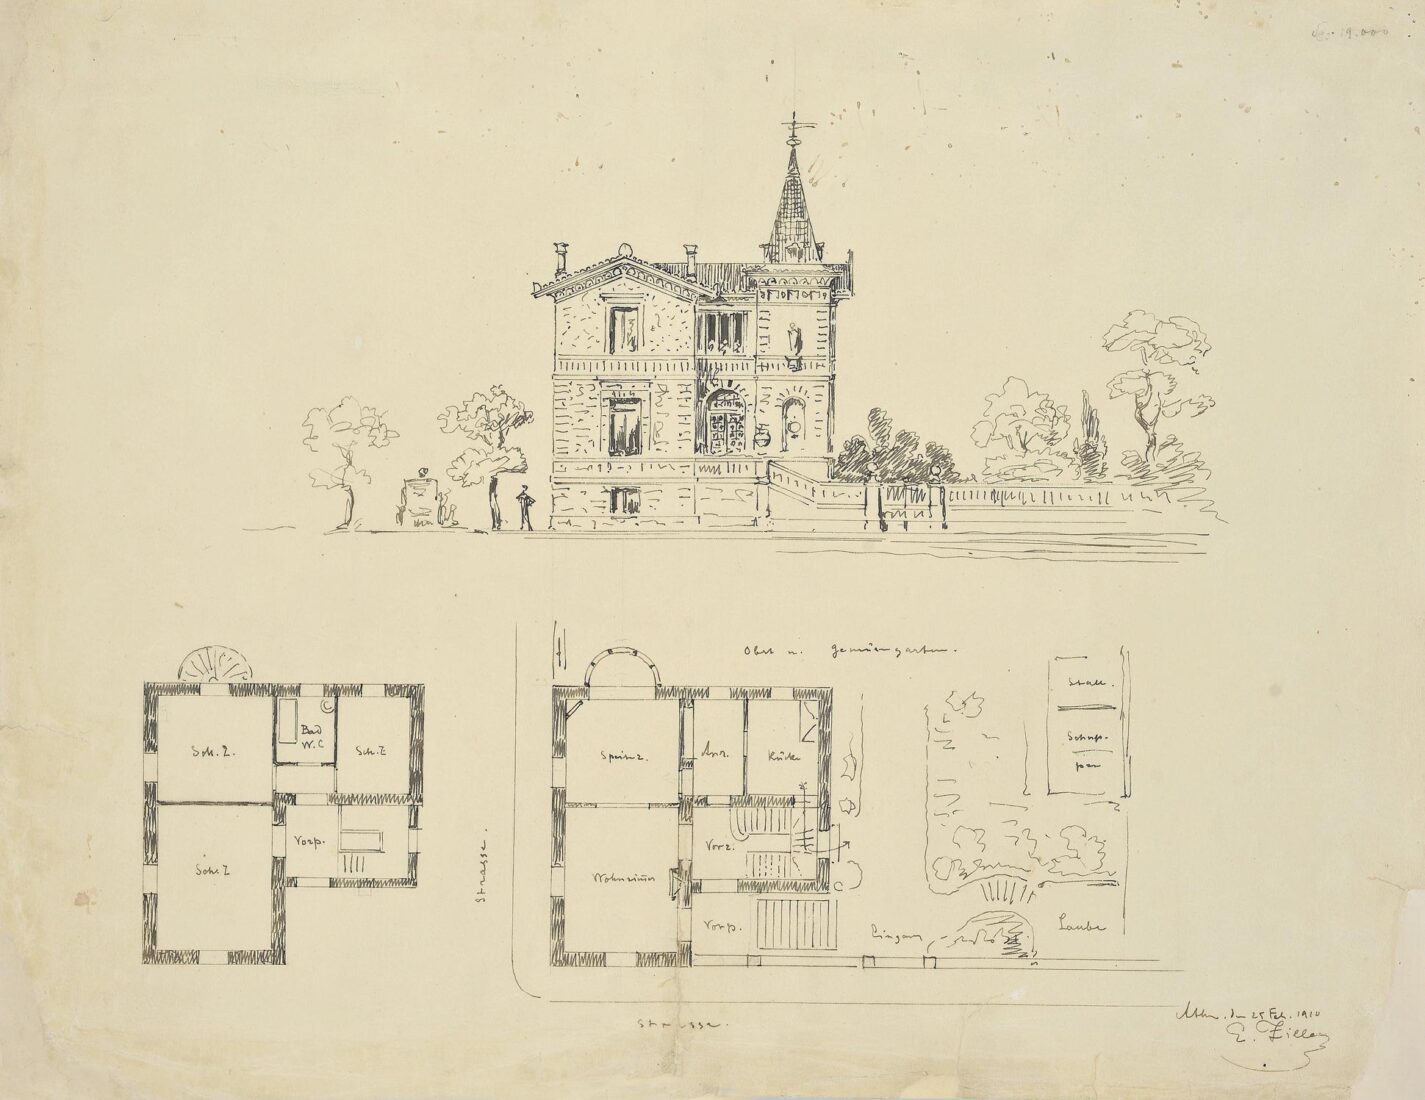 Type of Country House with Orchard and Kitchen Garden,
perhaps for the Ziller District in “Kokkina Horafia” [Red Fields], Kifisia - Ziller Ernst